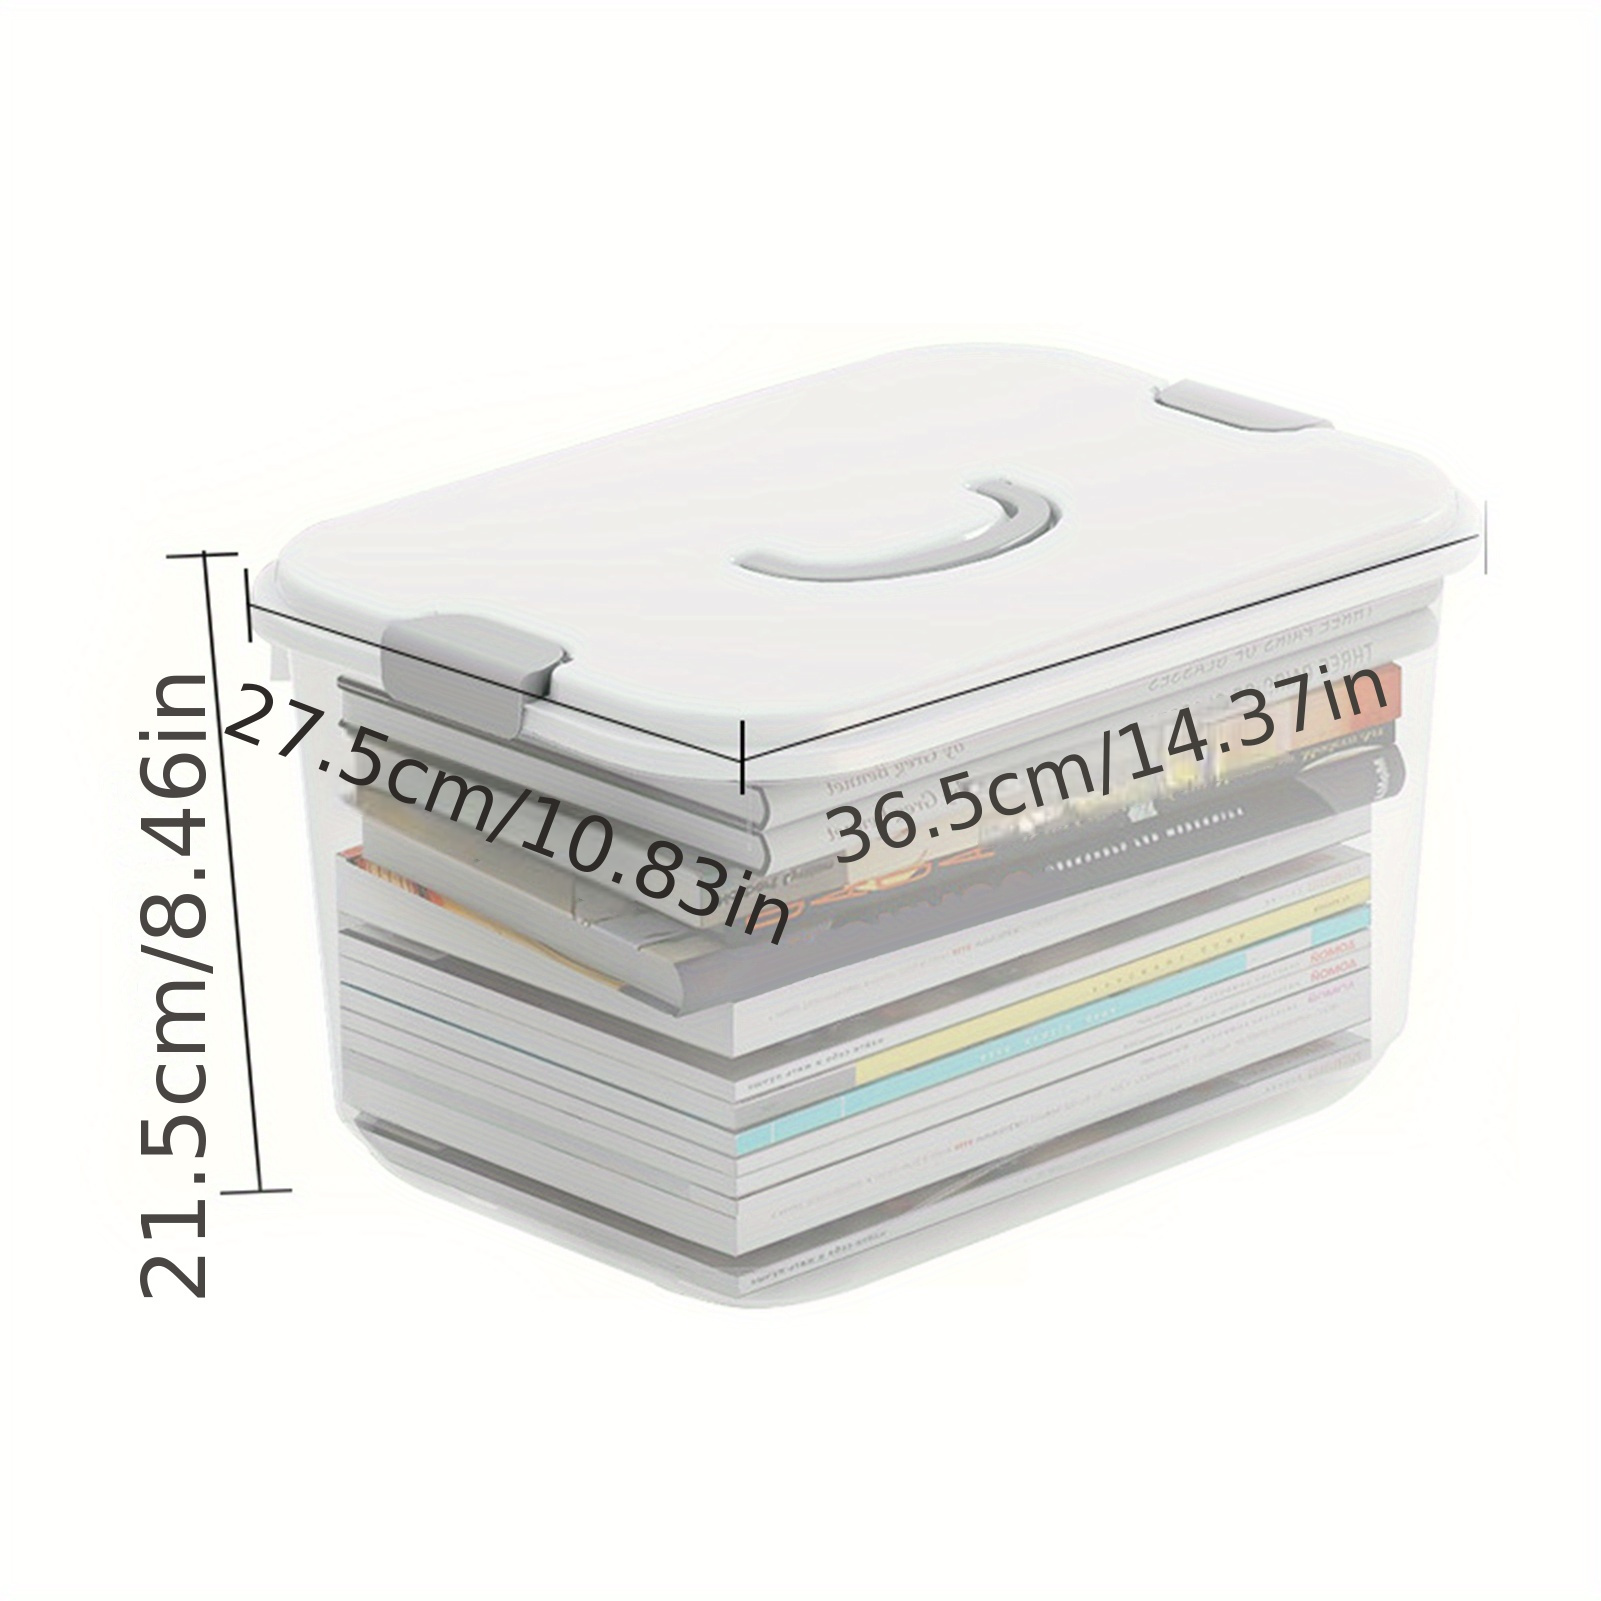 Storage Box with Detachable Lid, Transparent Handle, Multifunctional Plastic, Portable Clothes Toys Sorting Box, Household Supplies, Size: Small